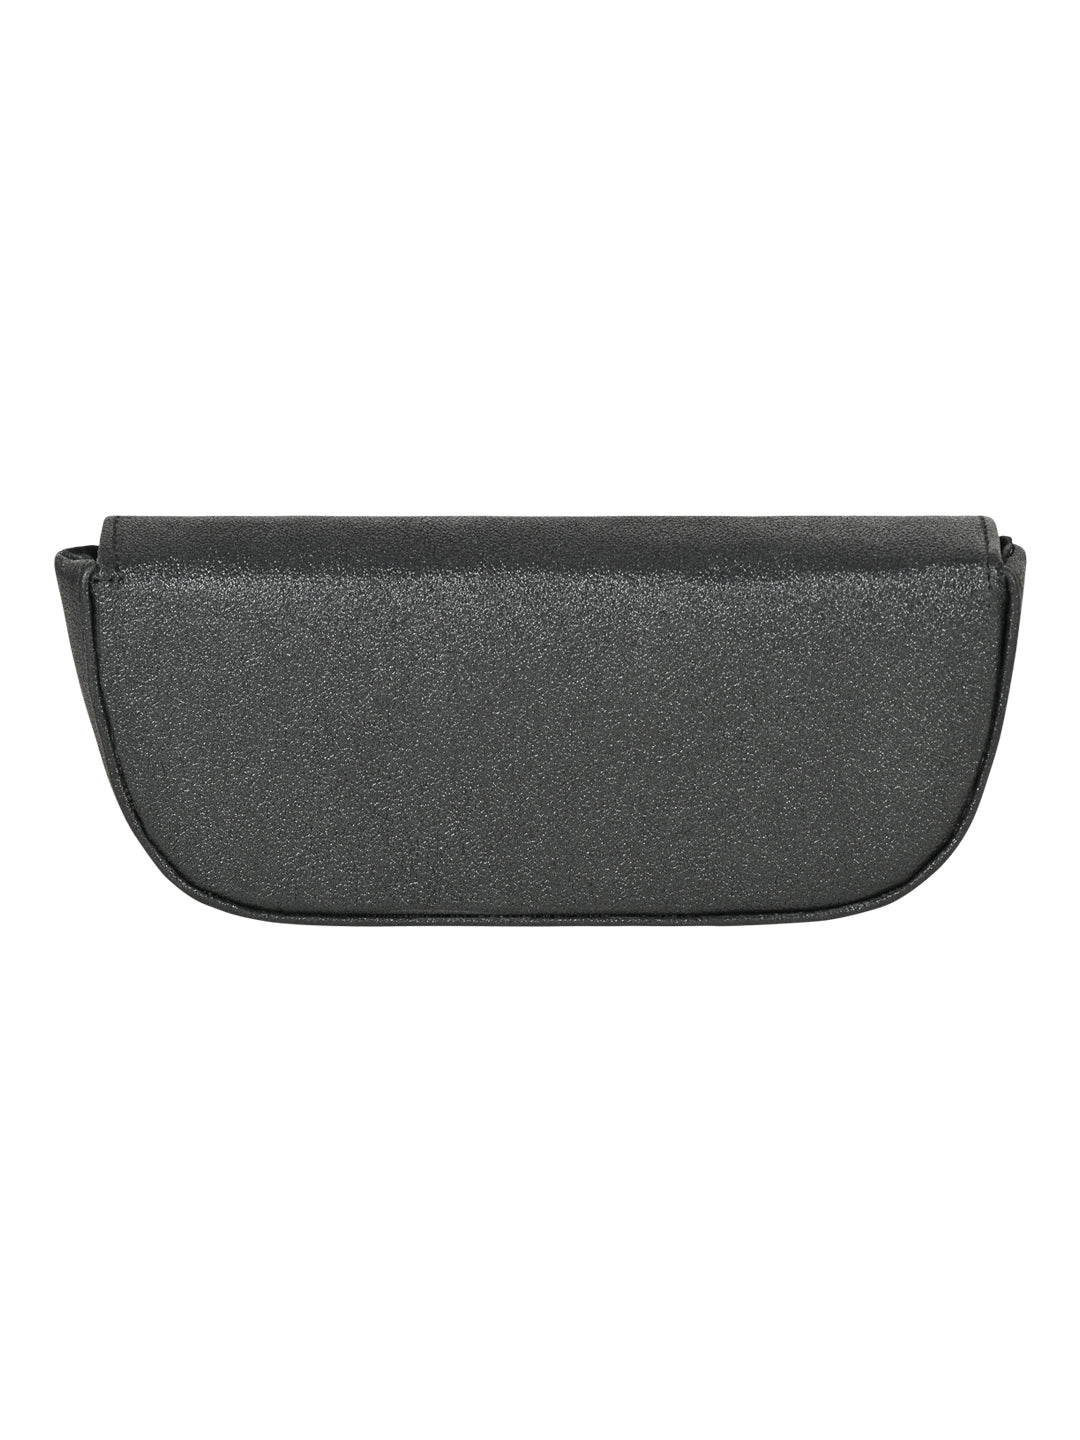 Protect your sunglasses with flair in our fashionable sunglass case. 